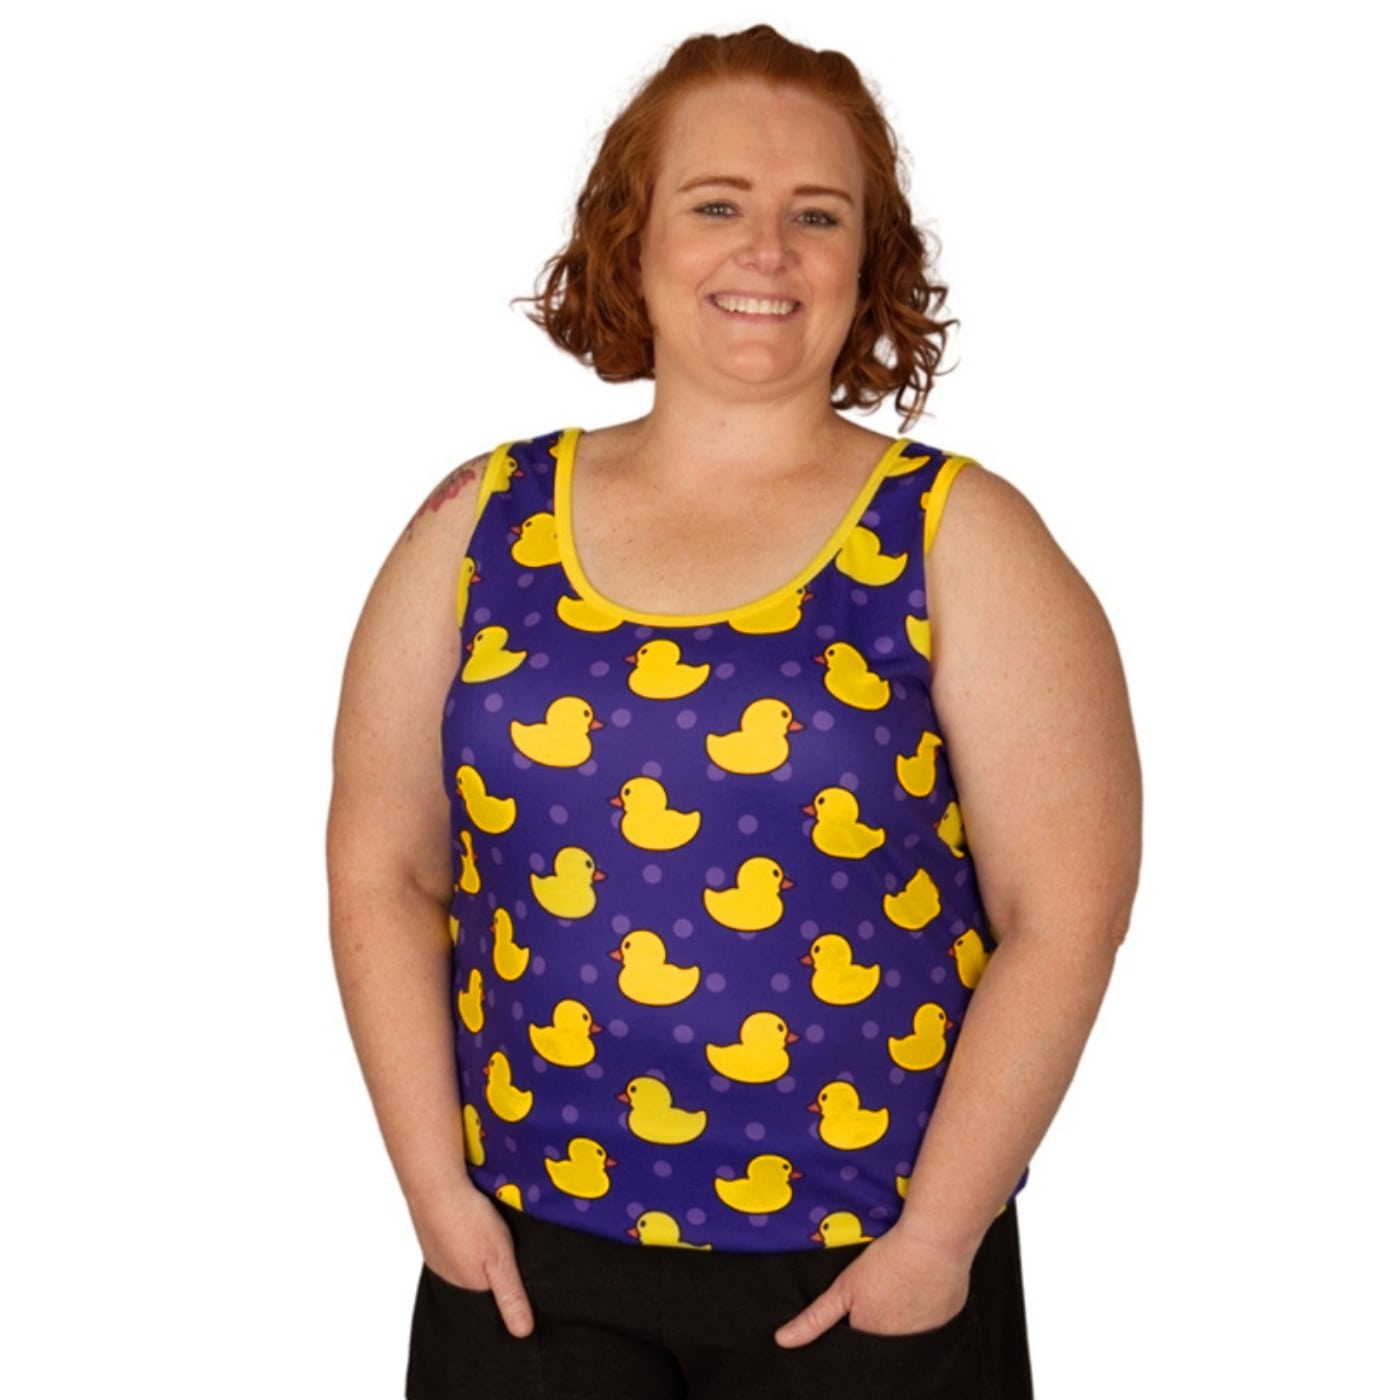 Yellow Ducky Singlet Top by RainbowsAndFairies.com.au (Yellow Duck - Rubber Duck - Rubber Ducky - Vintage Inspired - Kitsch - Tank Top) - SKU: CL_SGLET_DUCKY_YEL - Pic-03